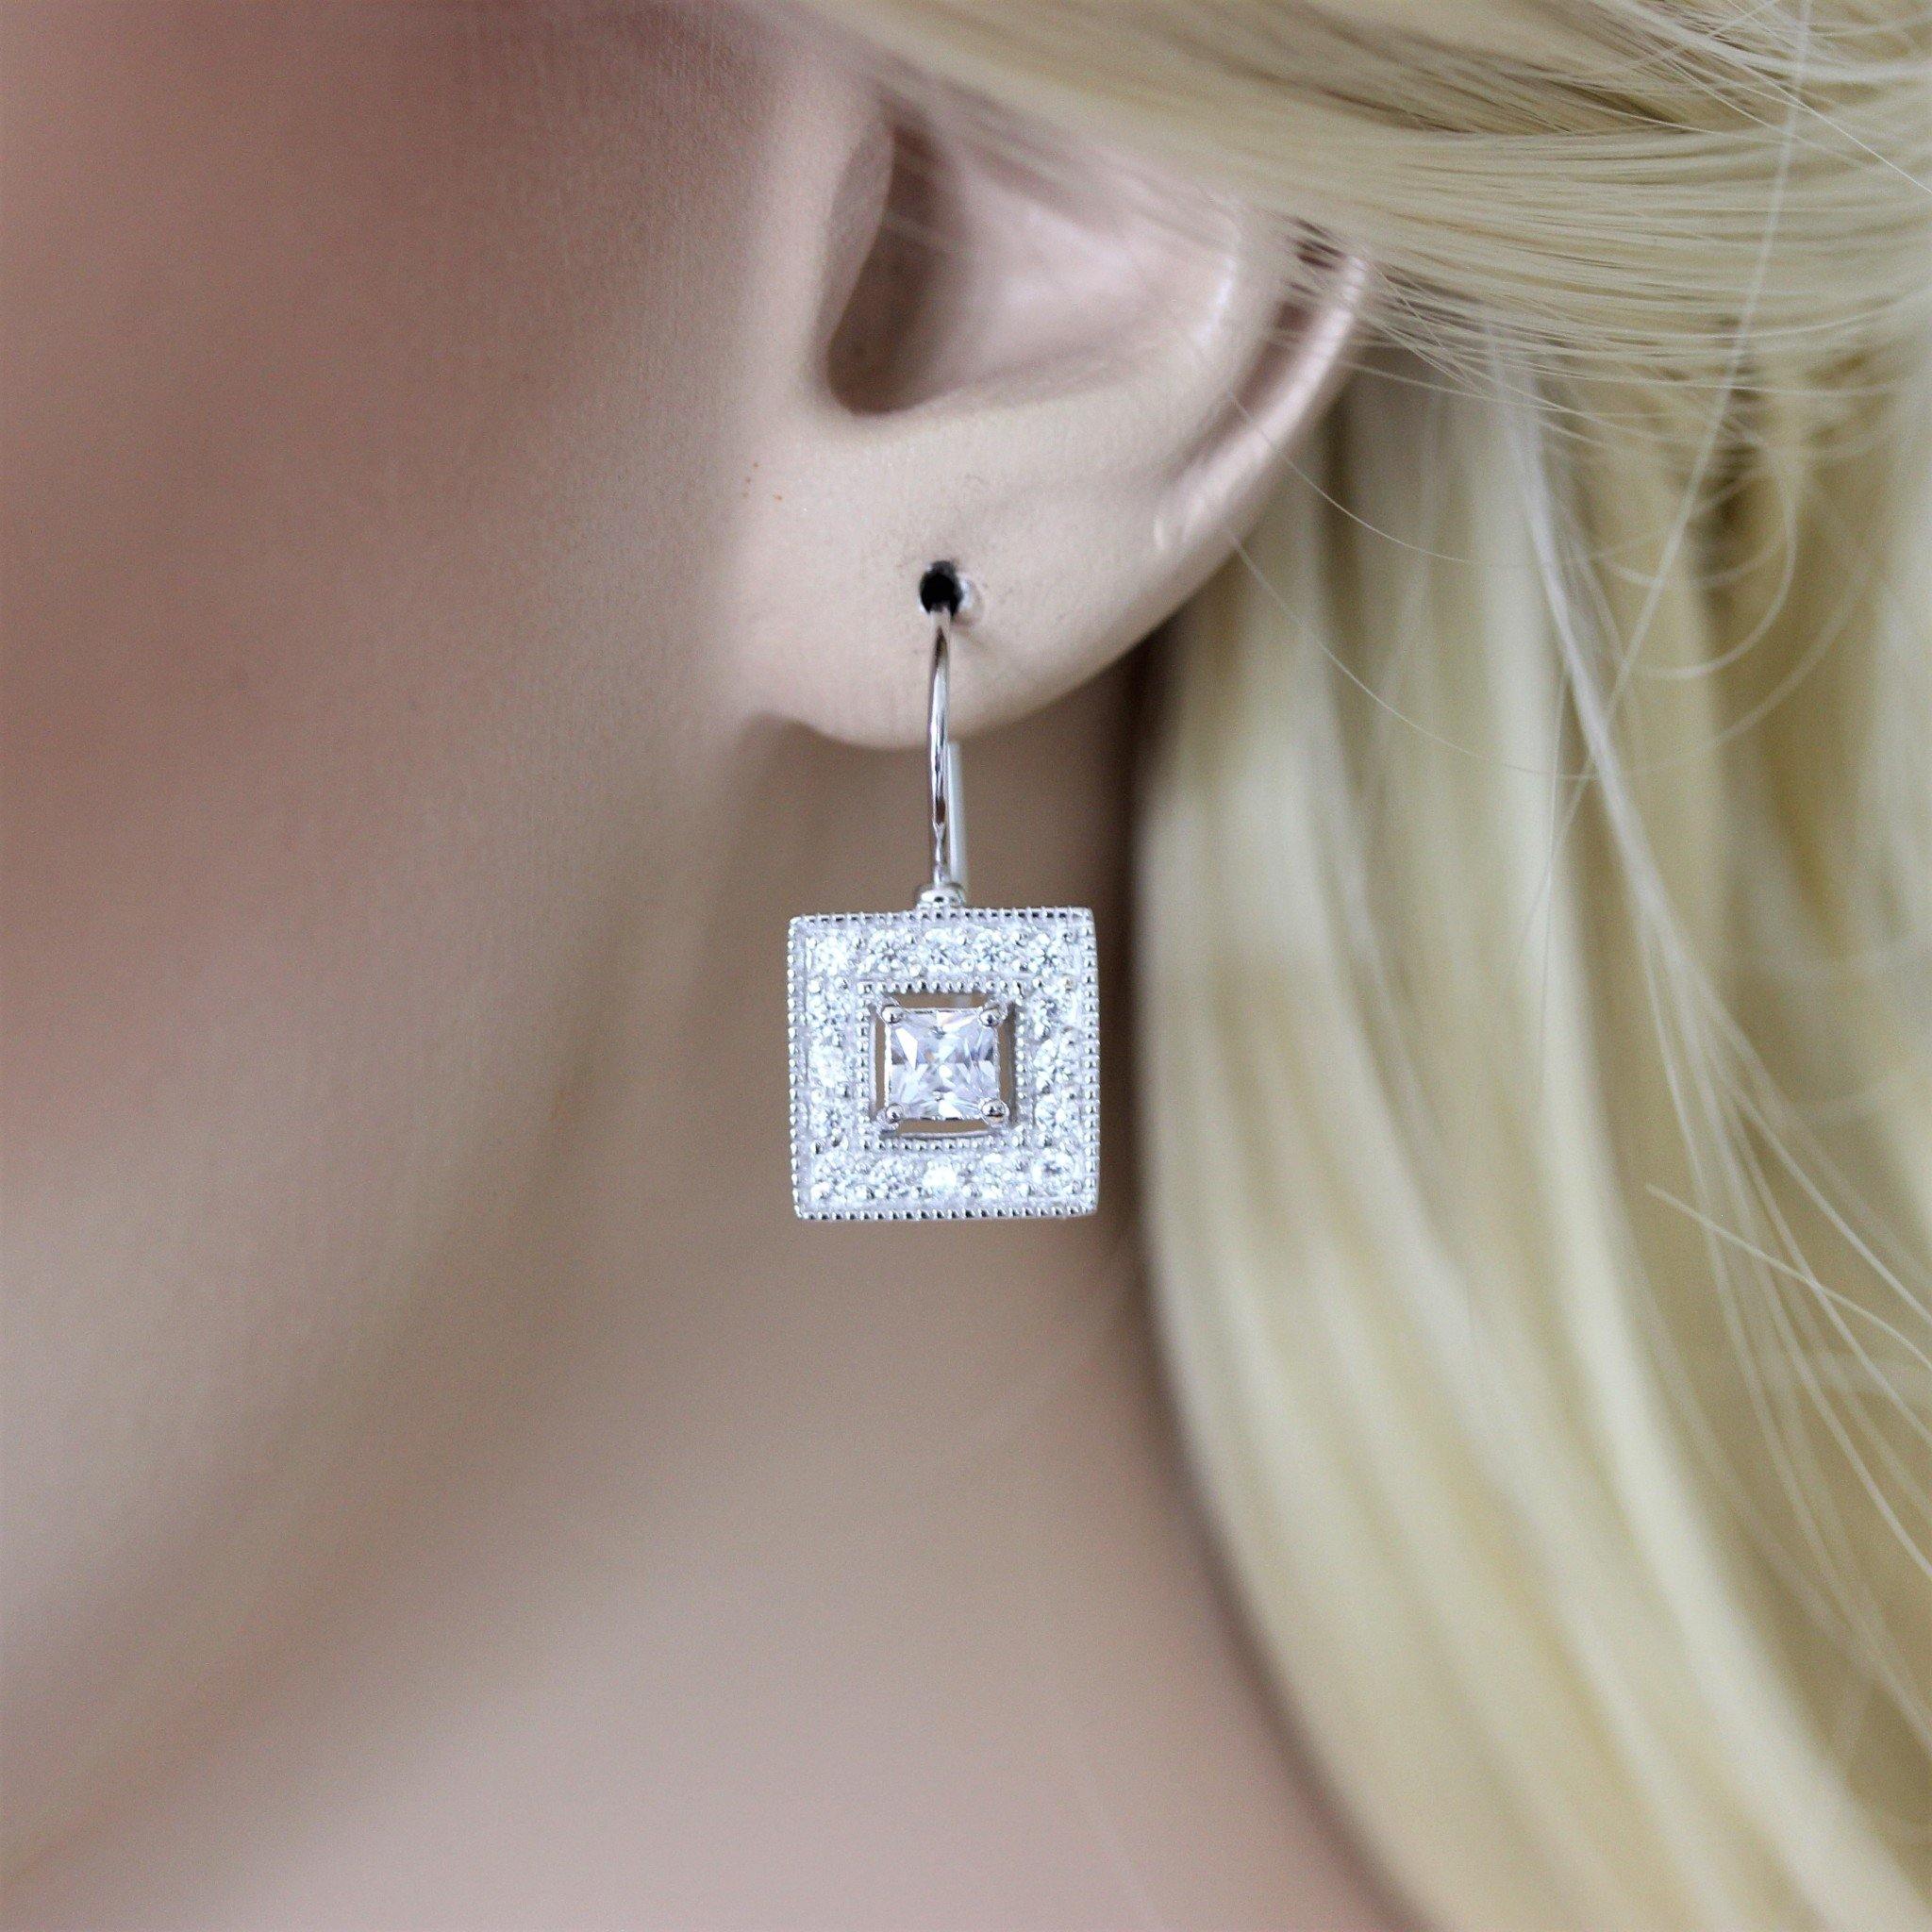 Sterling Silver Bridal Art Deco Vintage Inspired Square Halo CZ Drop Earrings - STERLING SILVER DESIGNS